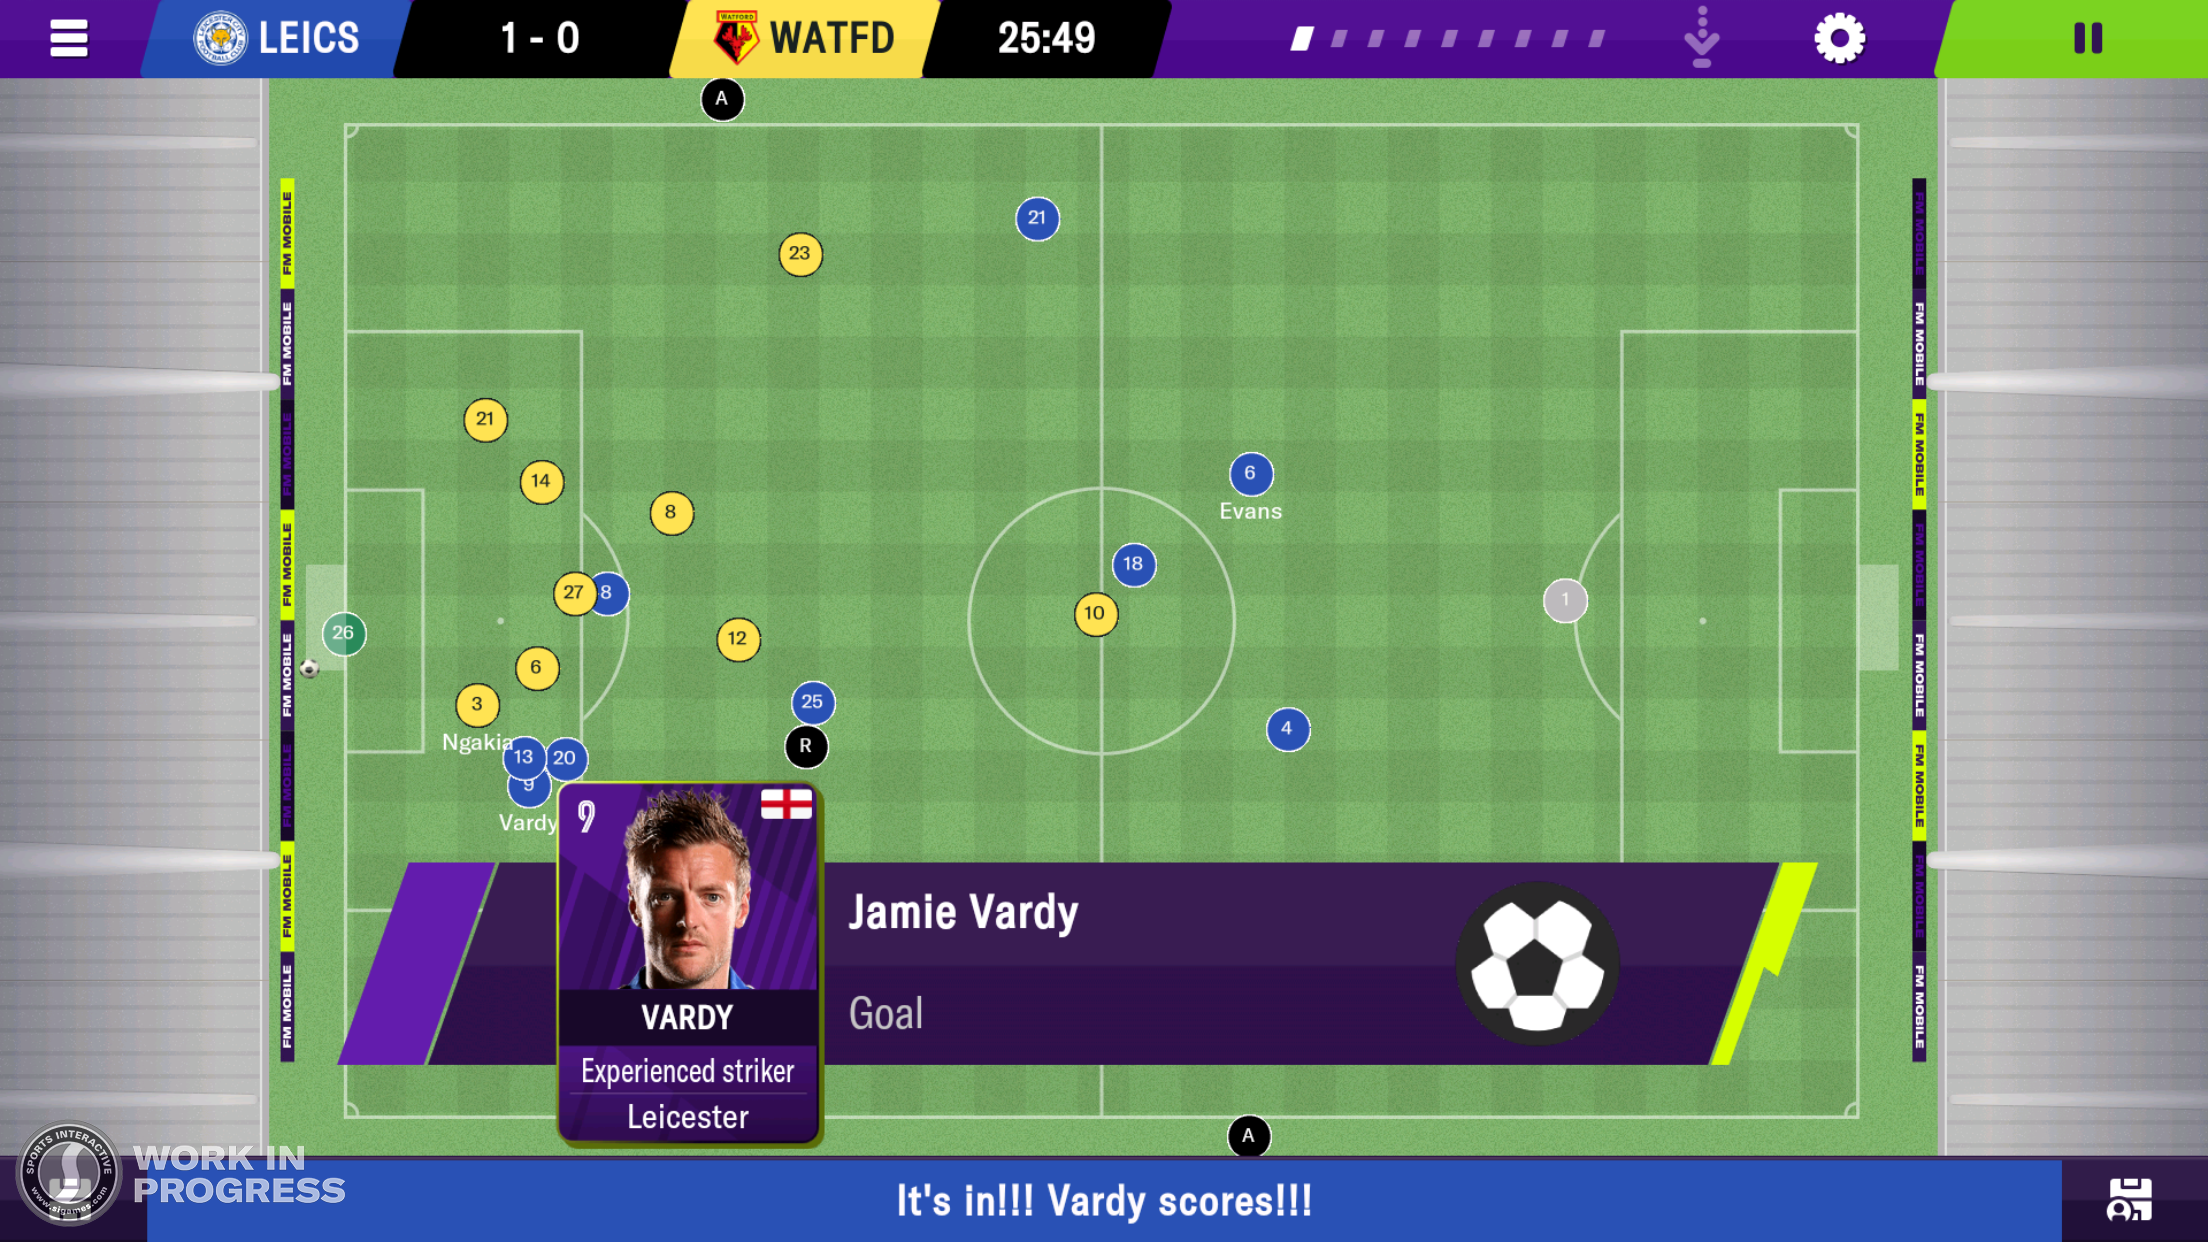 Football Manager 21 Mobile Pre Orders And Pre Registrations Are Now Live Ahead Of The November 24th Release Date